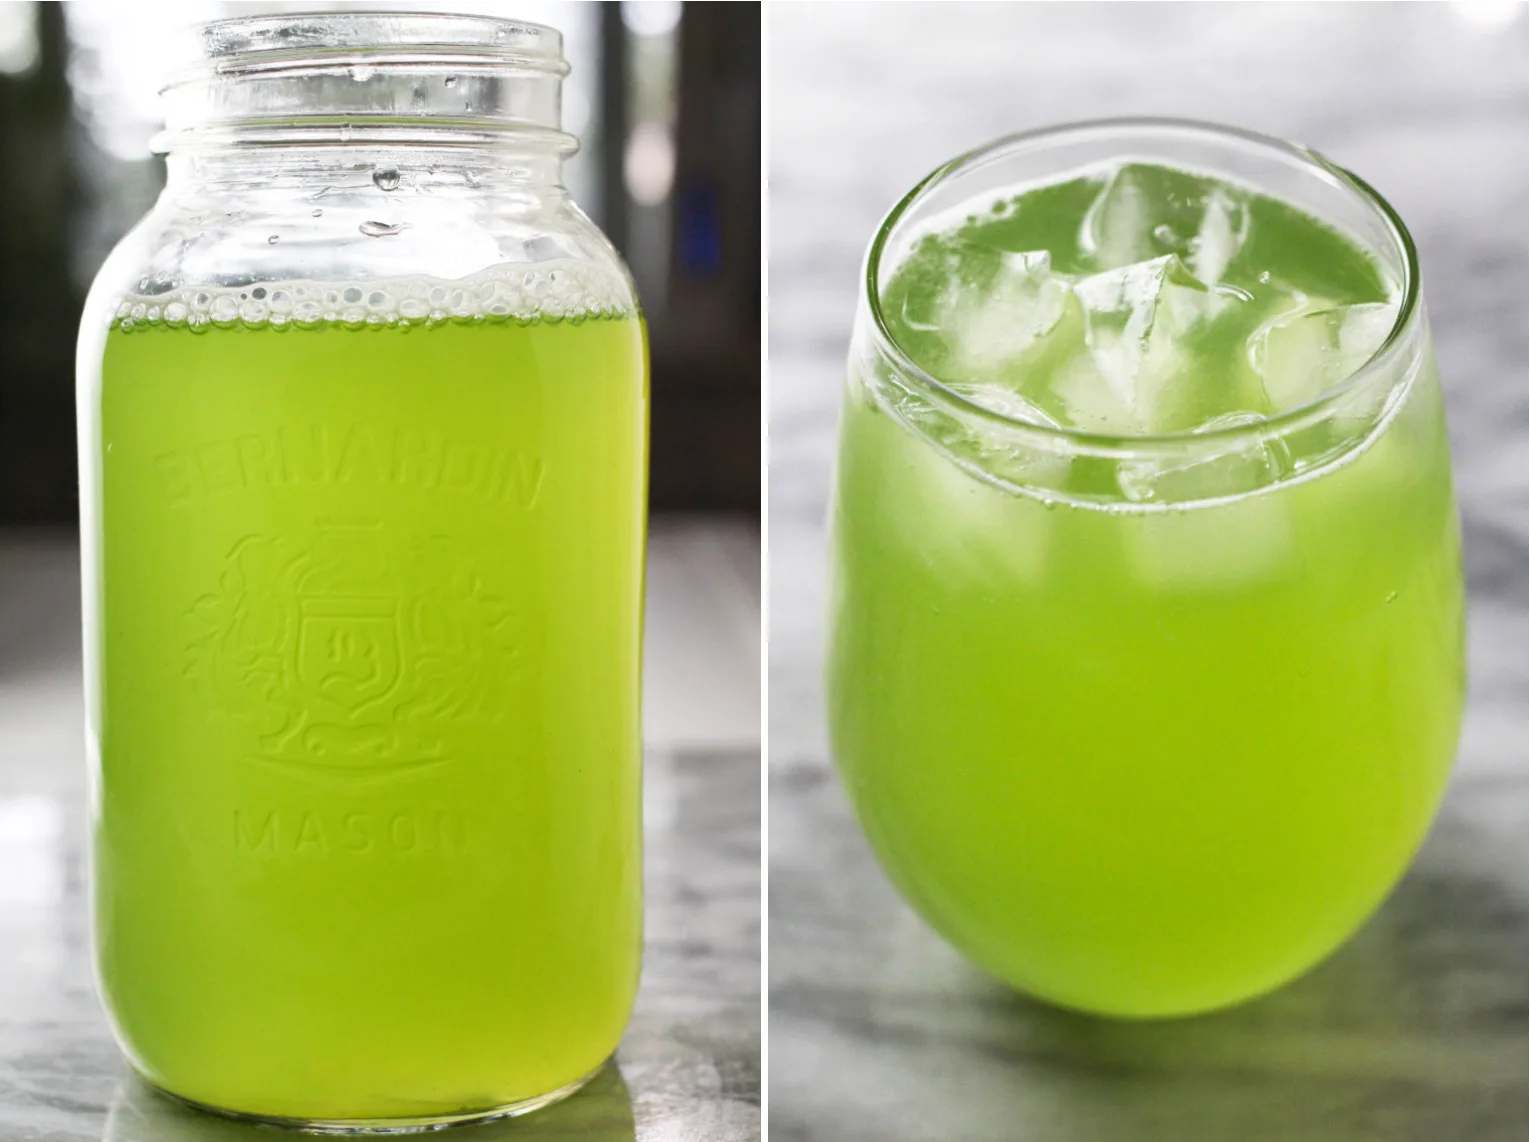 Two images side-by-side, on the left cucumber juice water in a mason jar. On the right, cucumber juice water and ice in a glass.